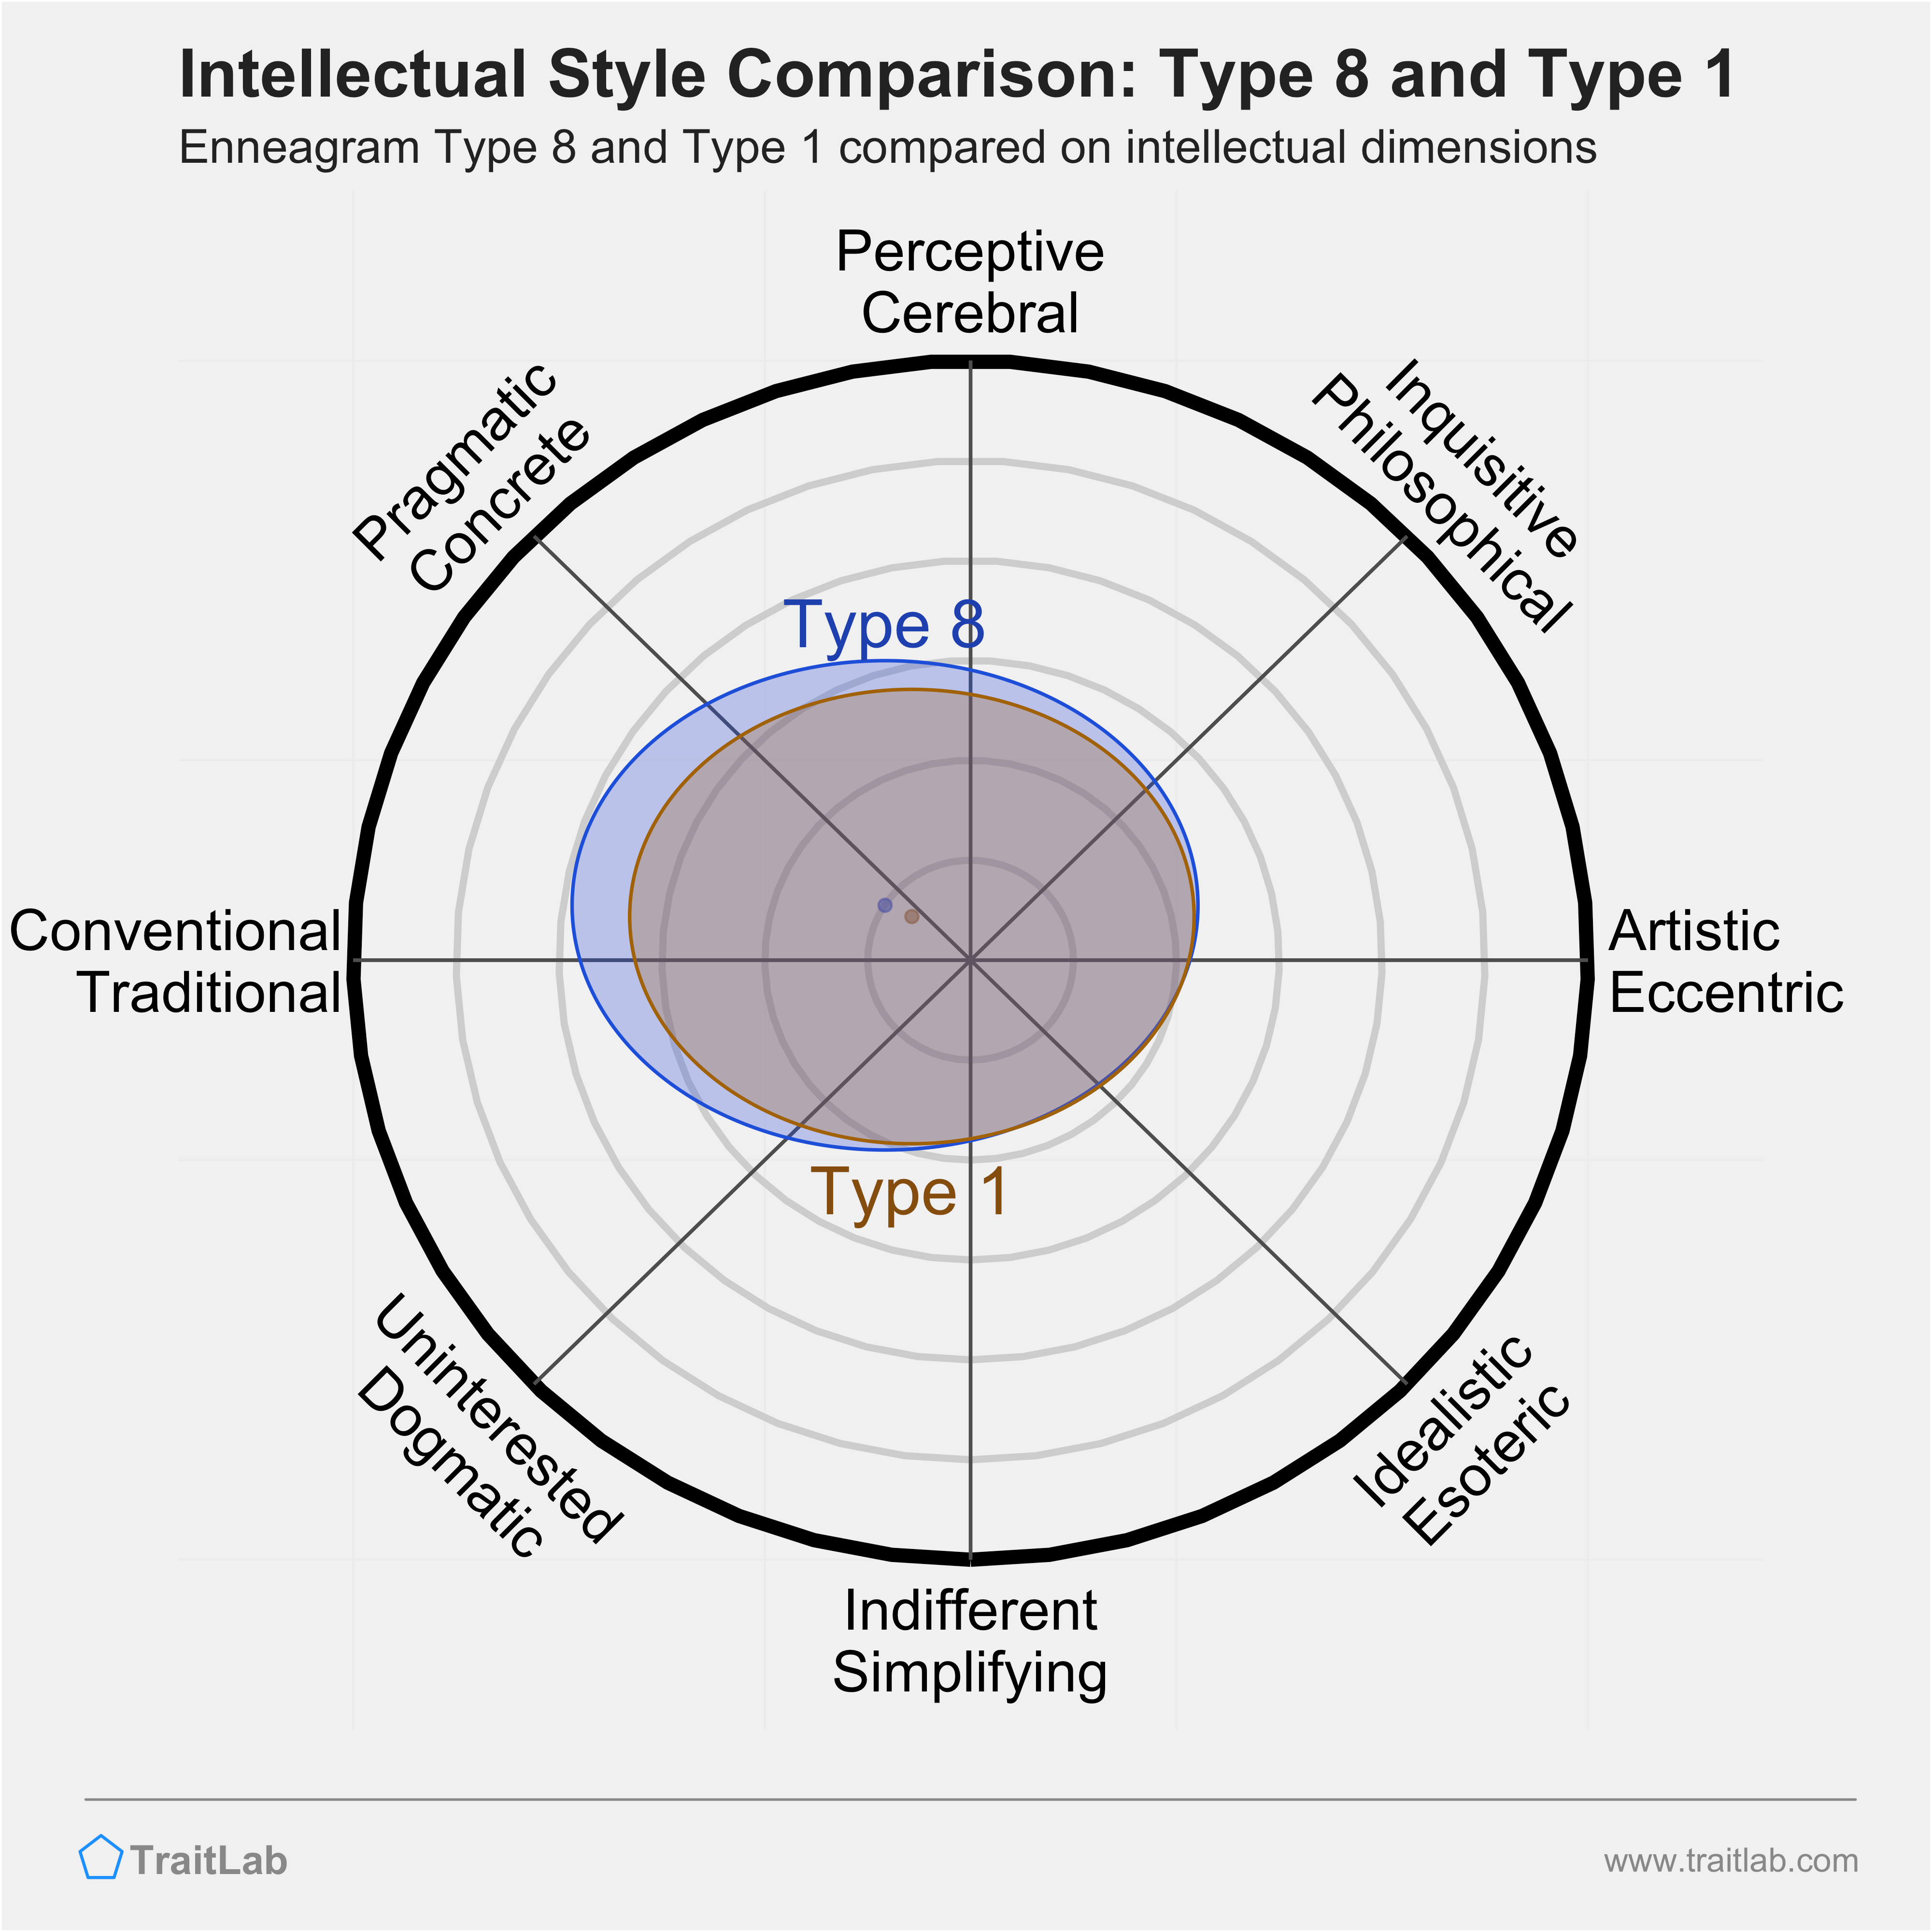 Type 8 and Type 1 comparison across intellectual dimensions